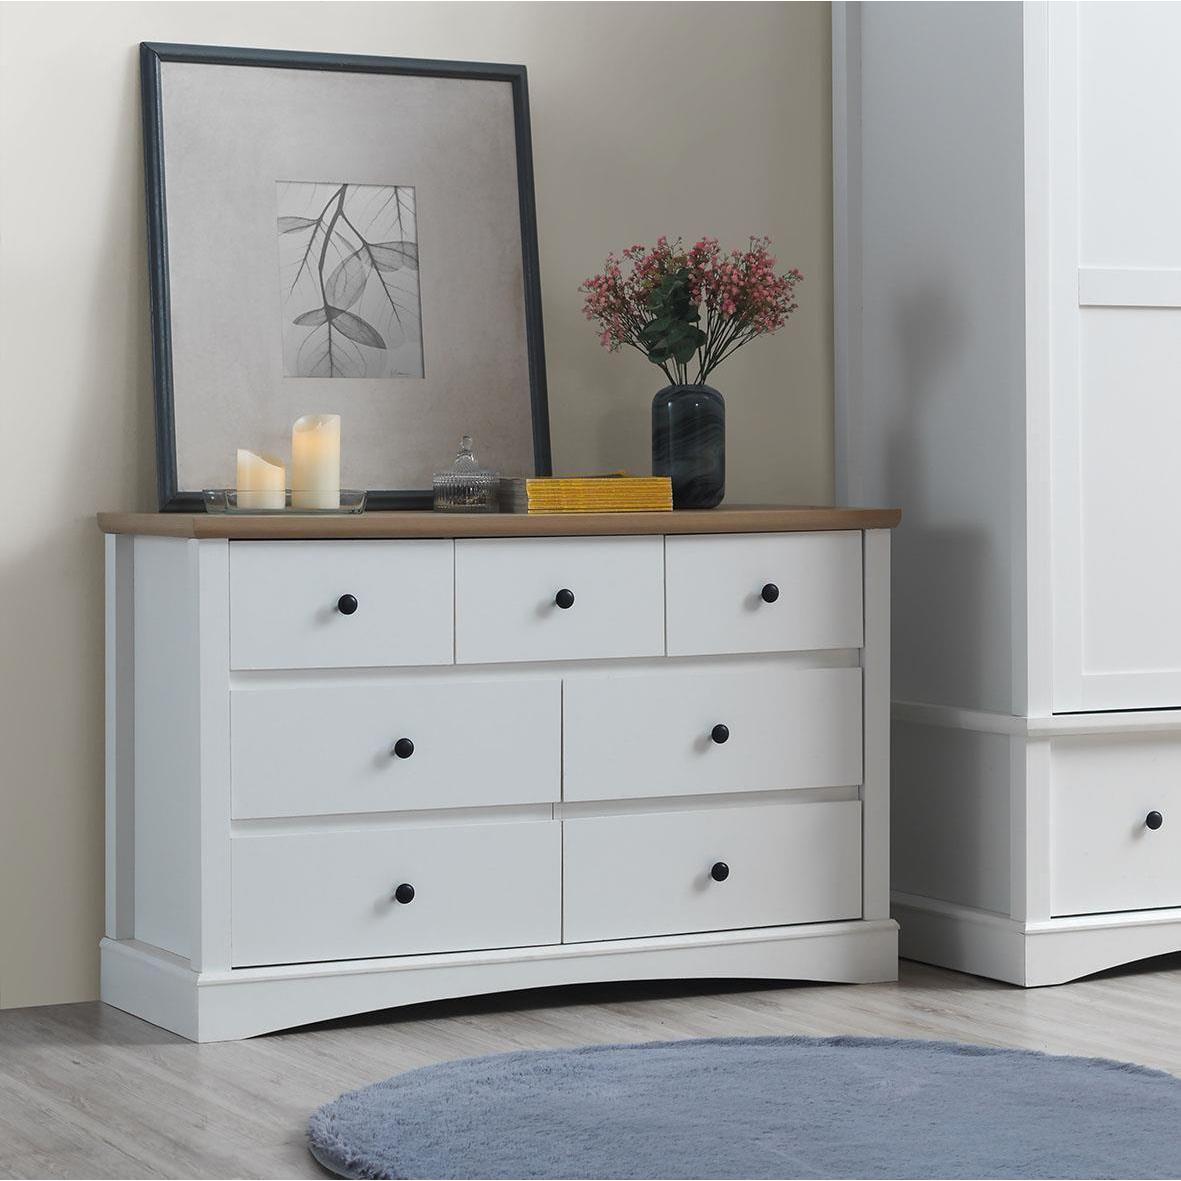 Carden British Country Style 3 Piece Bedroom Set - 7 Drawers